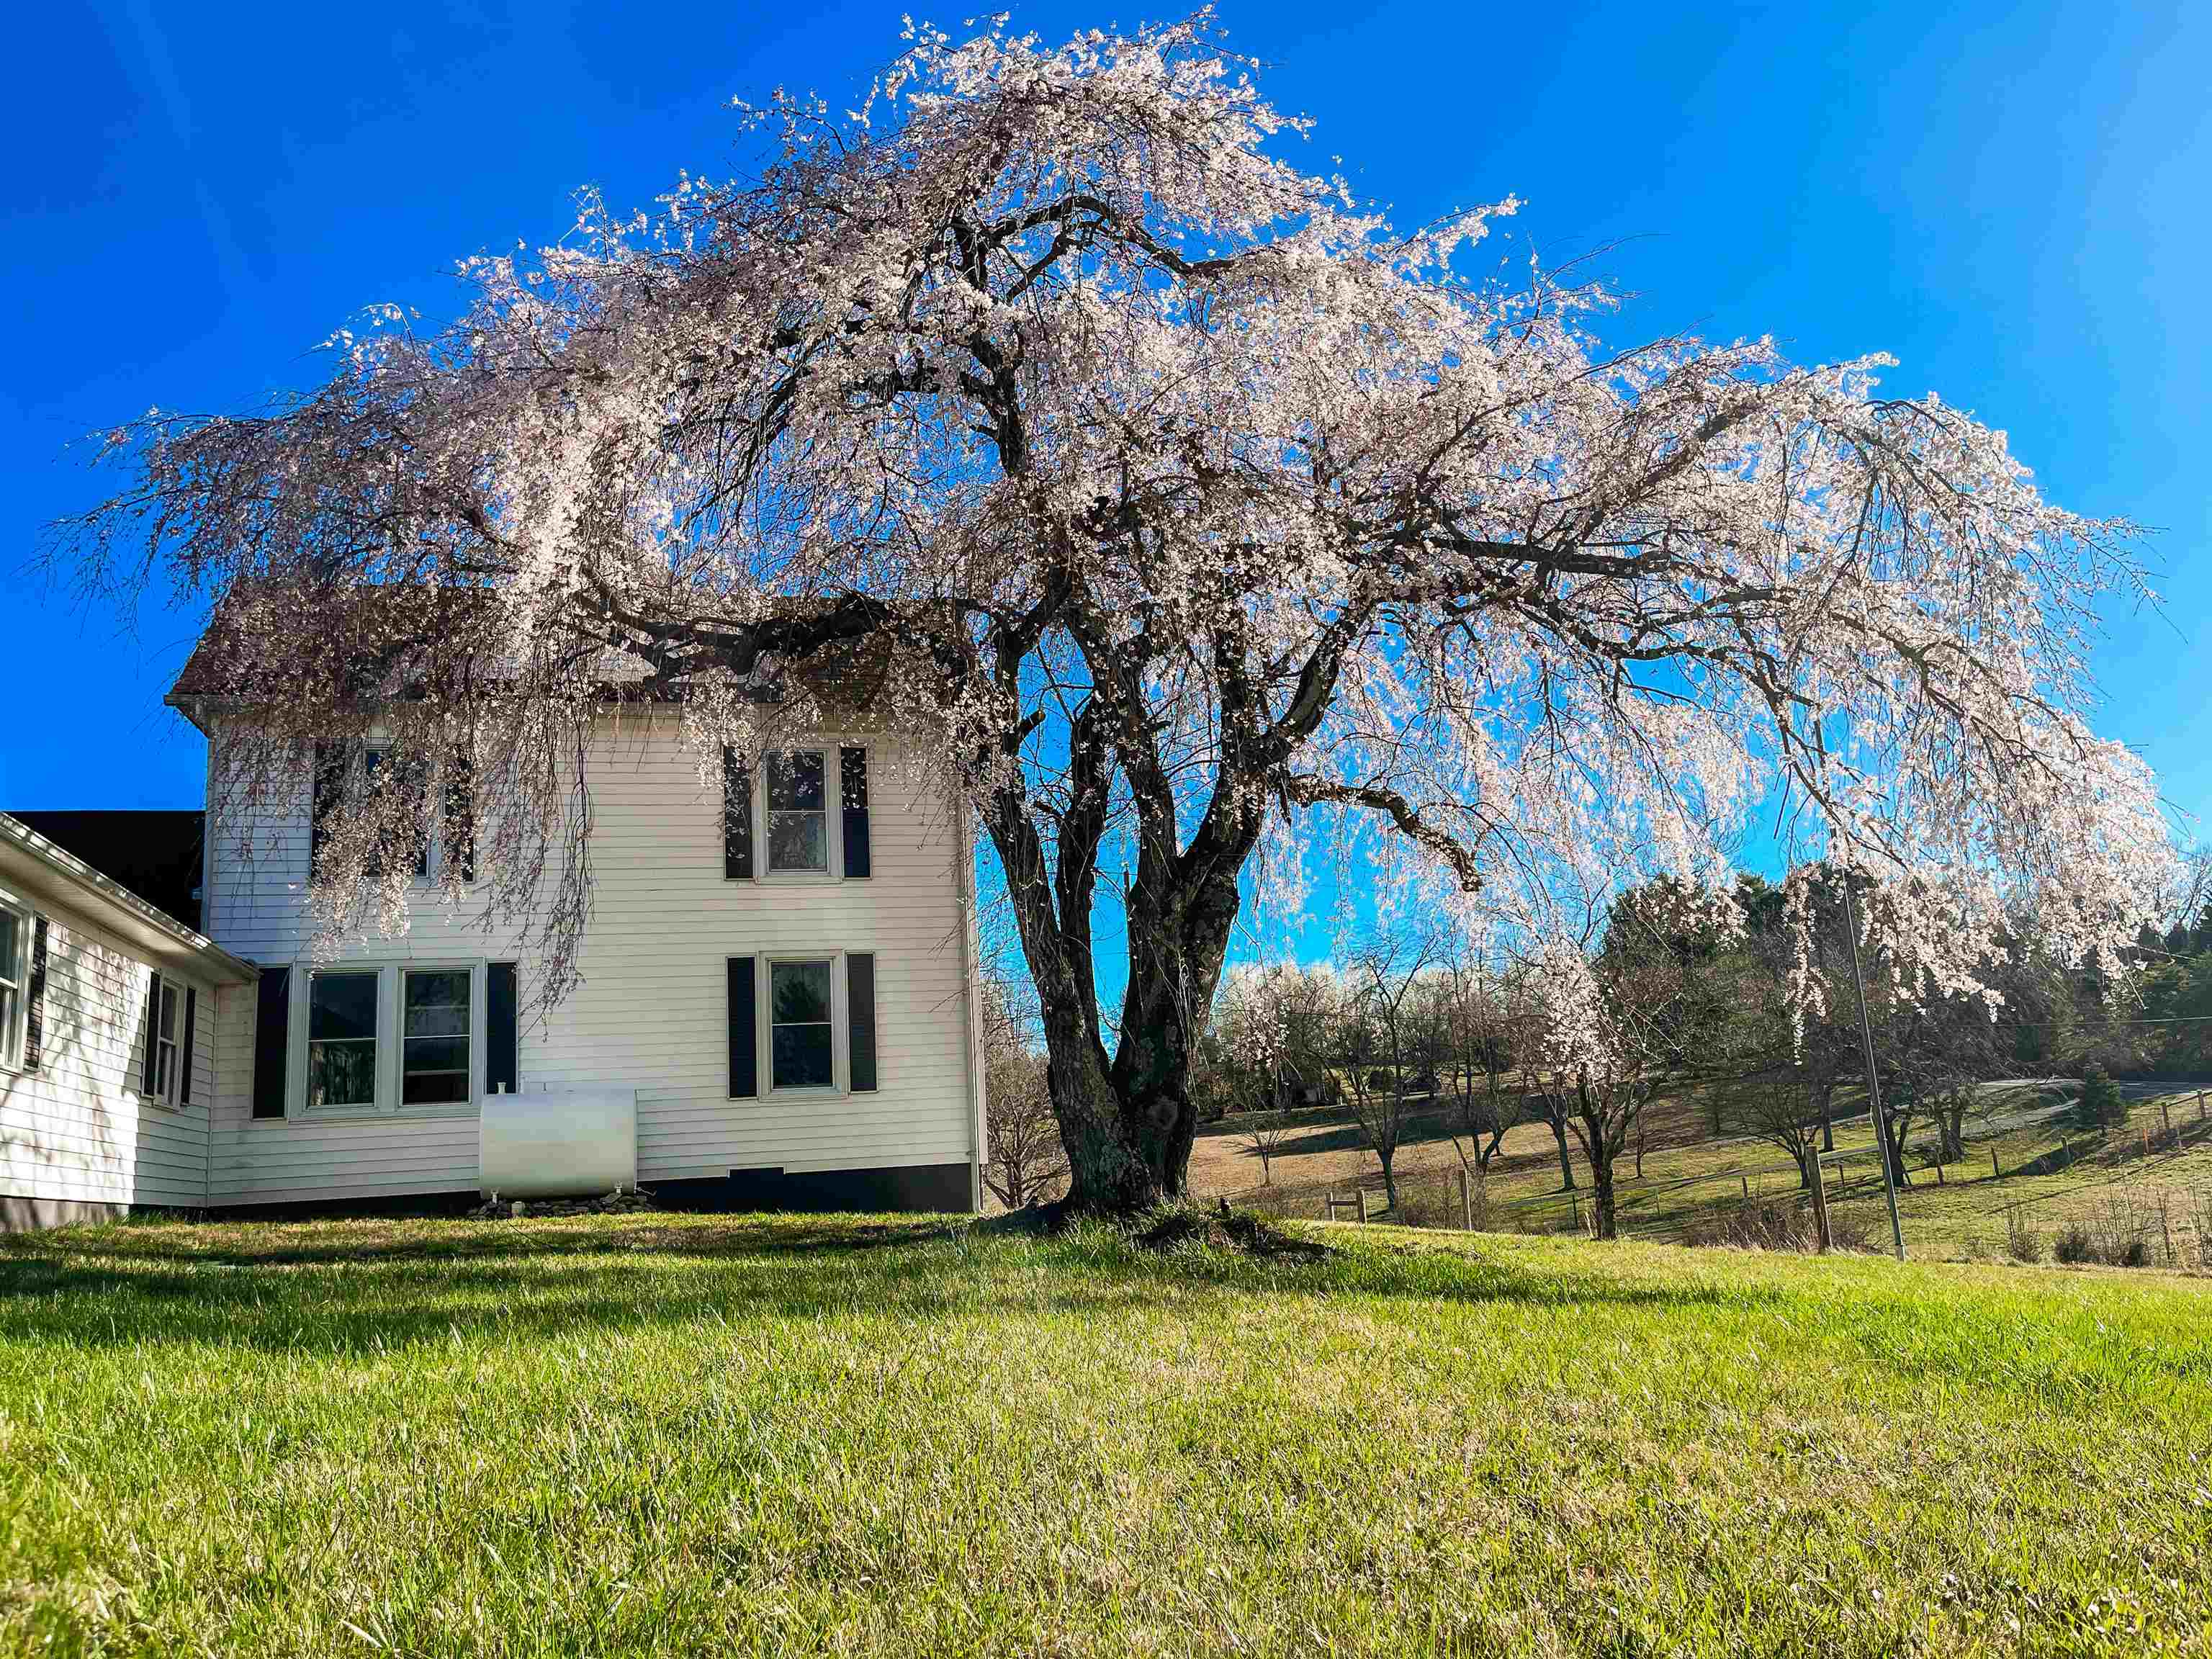 Own a timeless piece of NRV history. This elegantly updated farmhouse on 3.9 fenced acres, originally constructed in 1910, has a charm that must be experienced. Be greeted by a gentle creek front, a stunning weeping cherry tree, and multiple raised beds for gardening. Features original, handcrafted wood staircase, mantels, and doors. Reclaimed woodworking, restored hardwood flooring and waterproof woodgrain LVT throughout. 2.5 newly renovated bathrooms, including a gorgeous tile shower. Bring the dogs, with a spacious fenced backyard and insulated outbuilding to keep your furry friend(s) secure and comfortable in all weather. Convenient to everything, less than 15 minutes to Virginia Tech, Radford University, and Christiansburg. 1.5 miles from the New River. Come see all this gem has to offer.